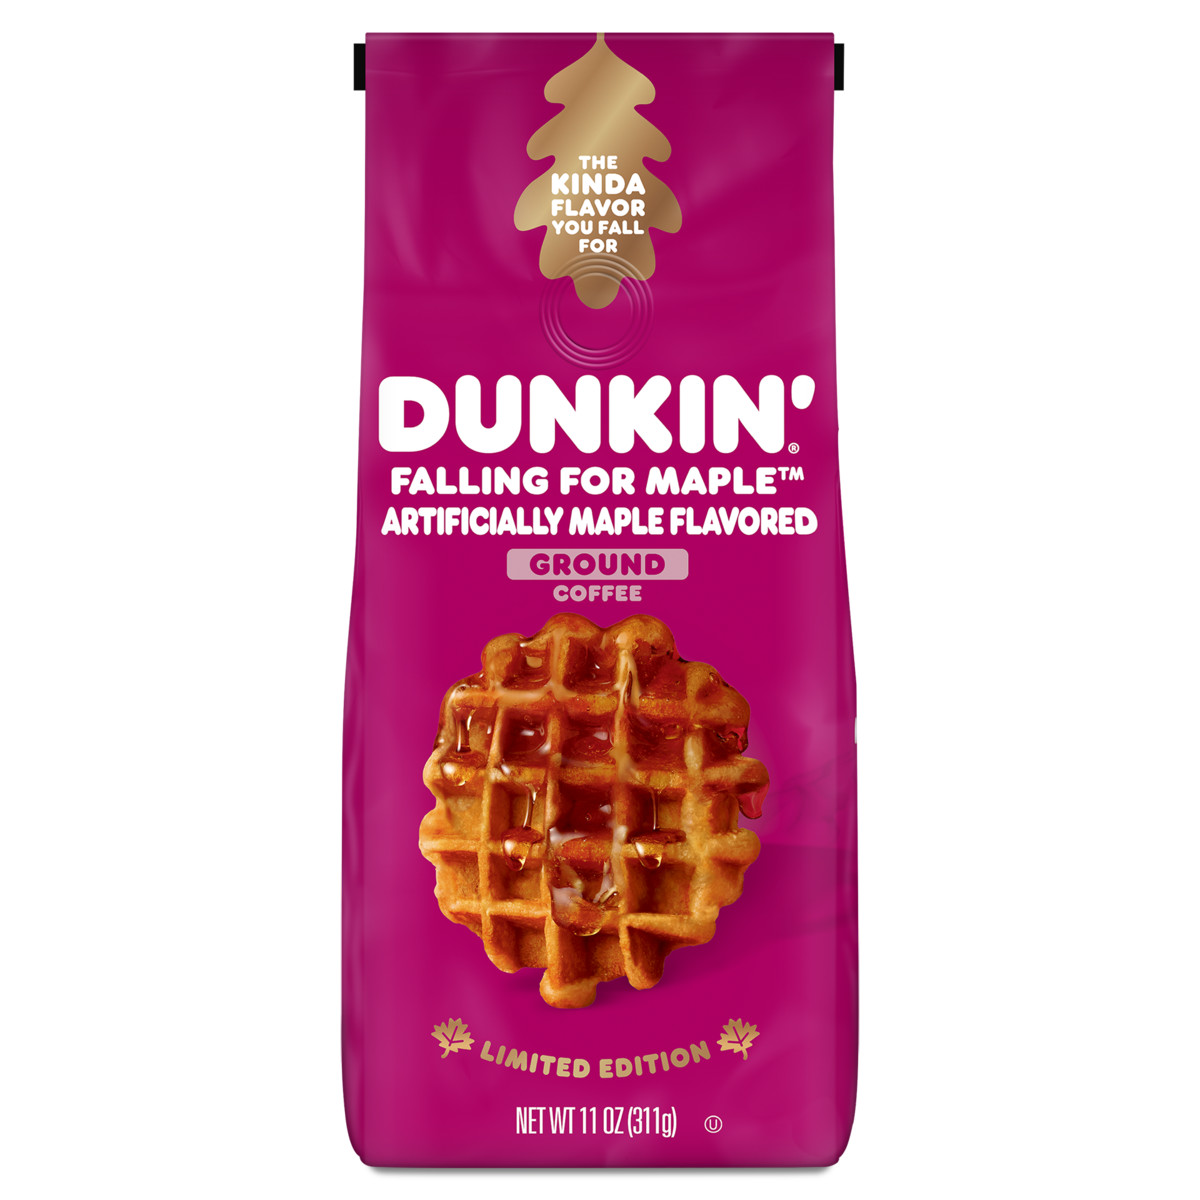 Dunkin'® Falling for Maple® Artificially Maple Flavored ground coffee in a dark pink bag with an image of a round golden waffle with syrup on it